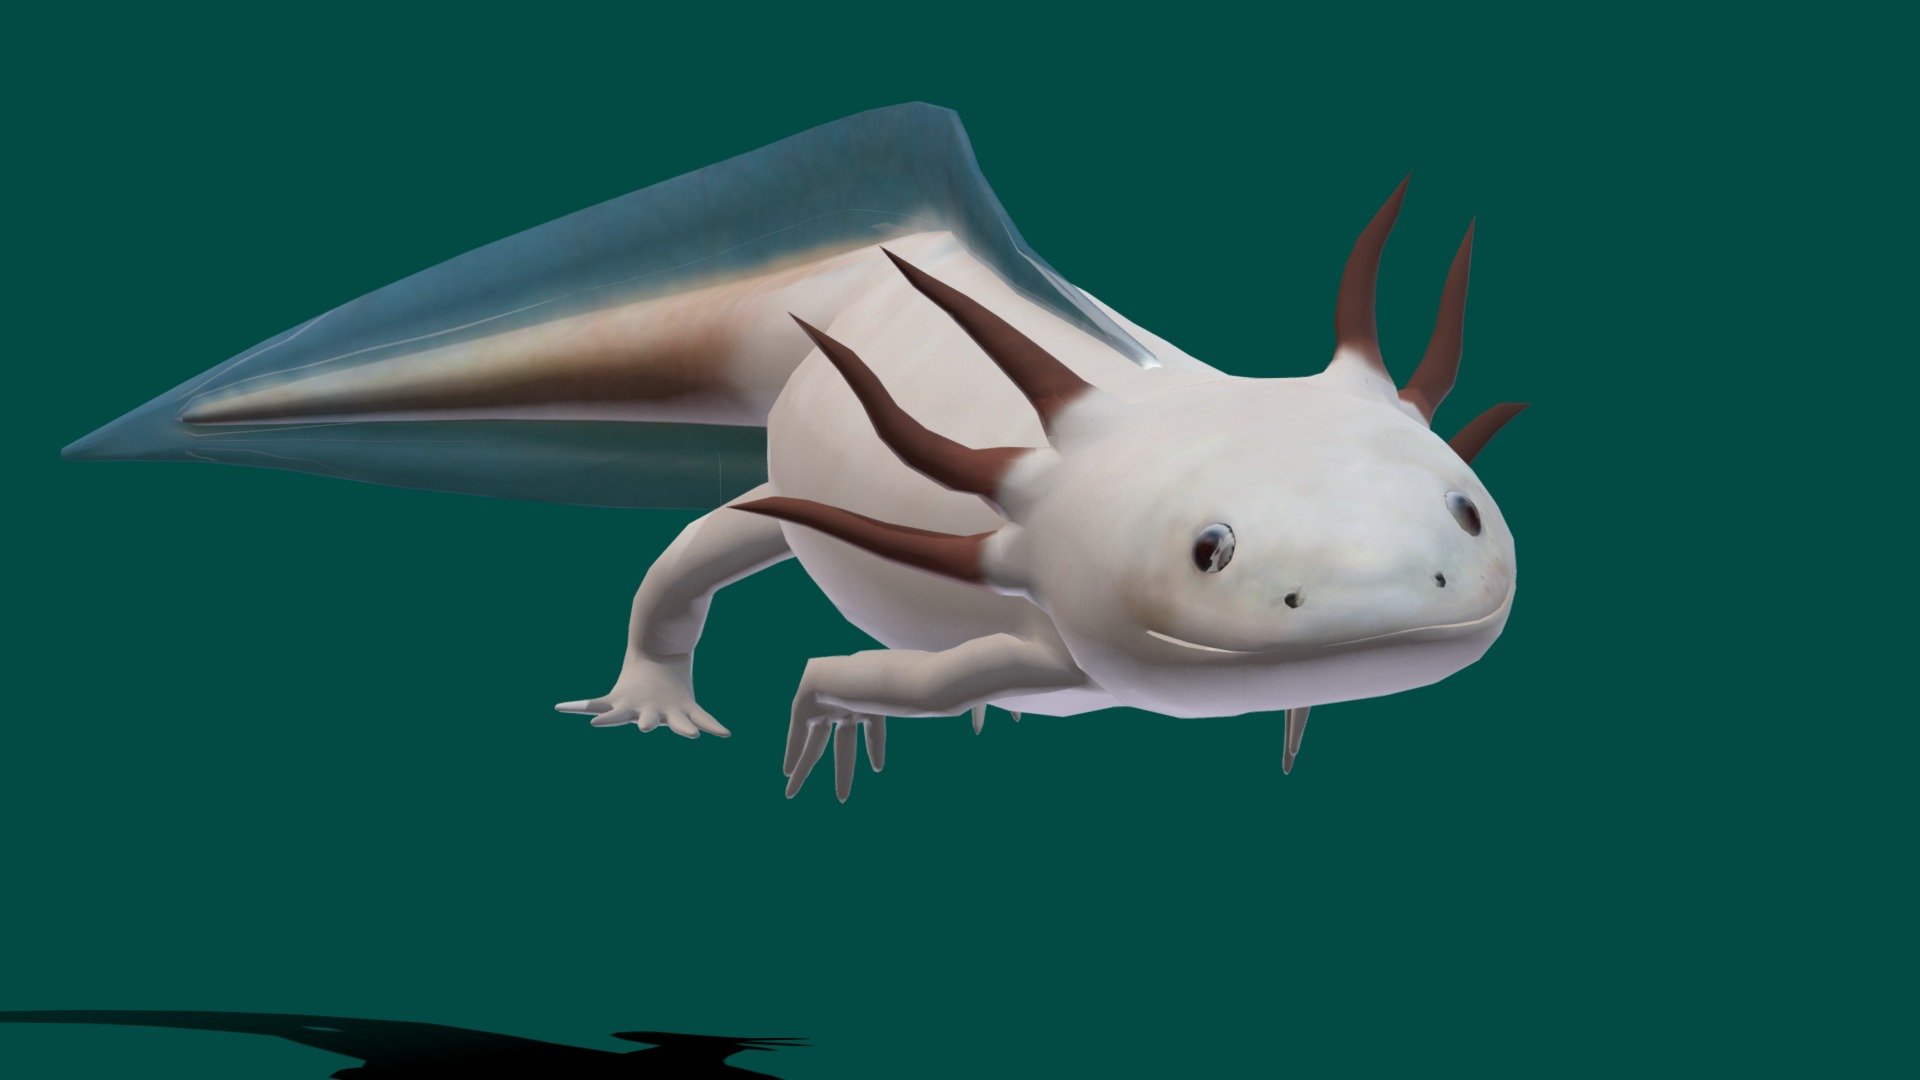 **Axolotl (Game Ready )




Game Ready / Lowpoly

Axolotl Aquatic Animal

10 Animations

4K PBR Textures Material/wings 1K

Unreal Unity Compatible

Blend File

USDZ File (AR Ready). Real Scale Dimension

Textures File

Gltf File ( Spark AR, Lens Studio , Effector , Spline, Play Canvas ) Compatible

Diffuse , Metallic, Roughness , AO(wing), Normal Map

Swim

Walk

Swim up 

Swim Down

Die

Rebith

Attack

Tail Attack

Swim right

Swim Left

The axolotl is a paedomorphic salamander closely related to the tiger salamander. It is unusual among amphibians in that it reaches adulthood without undergoing metamorphosis. Instead of taking to the land, adults remain aquatic and gilled. Wikipedia
Conservation status: Critically Endangered (Population decreasing) Encyclopedia of Life
Class: Amphibia
Family: Ambystomatidae
Genus: Ambystoma
Kingdom: Animalia
Order: Urodela
Phylum: Chordata - Axolotl (Low Poly) - 3D model by Nyilonelycompany 3d model